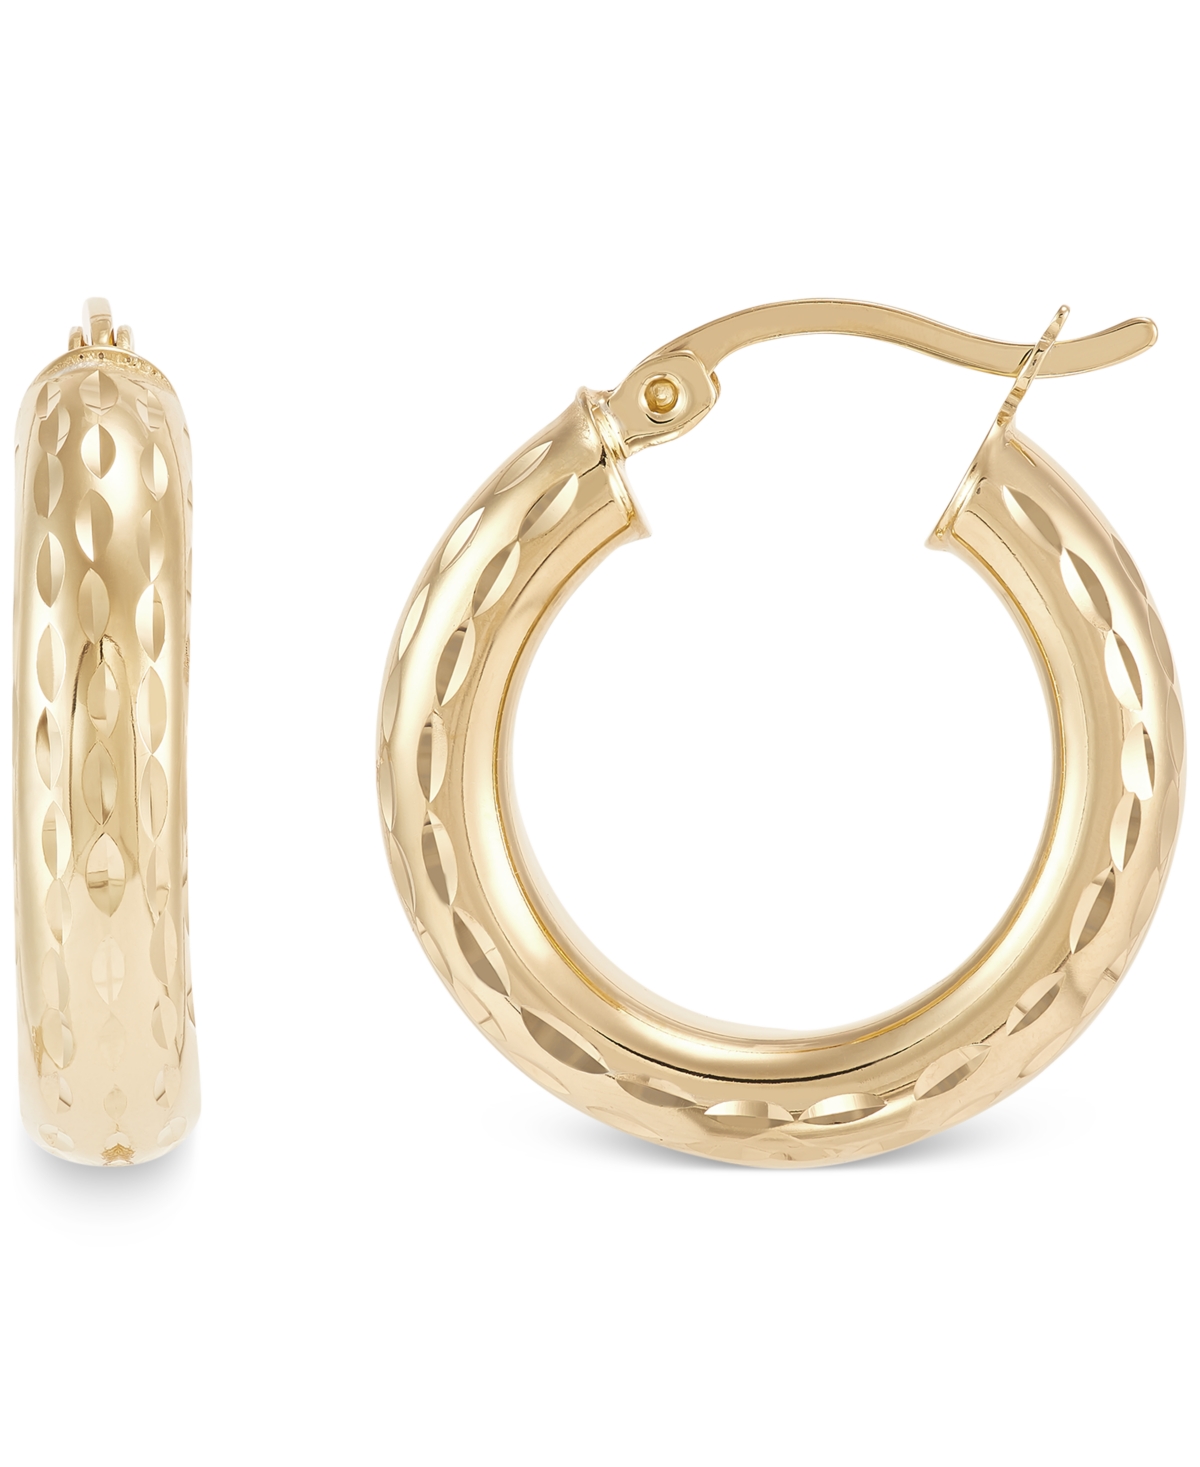 Textured Tube Small Hoop Earrings, 20mm, Created for Macy's - Gold Over Silver